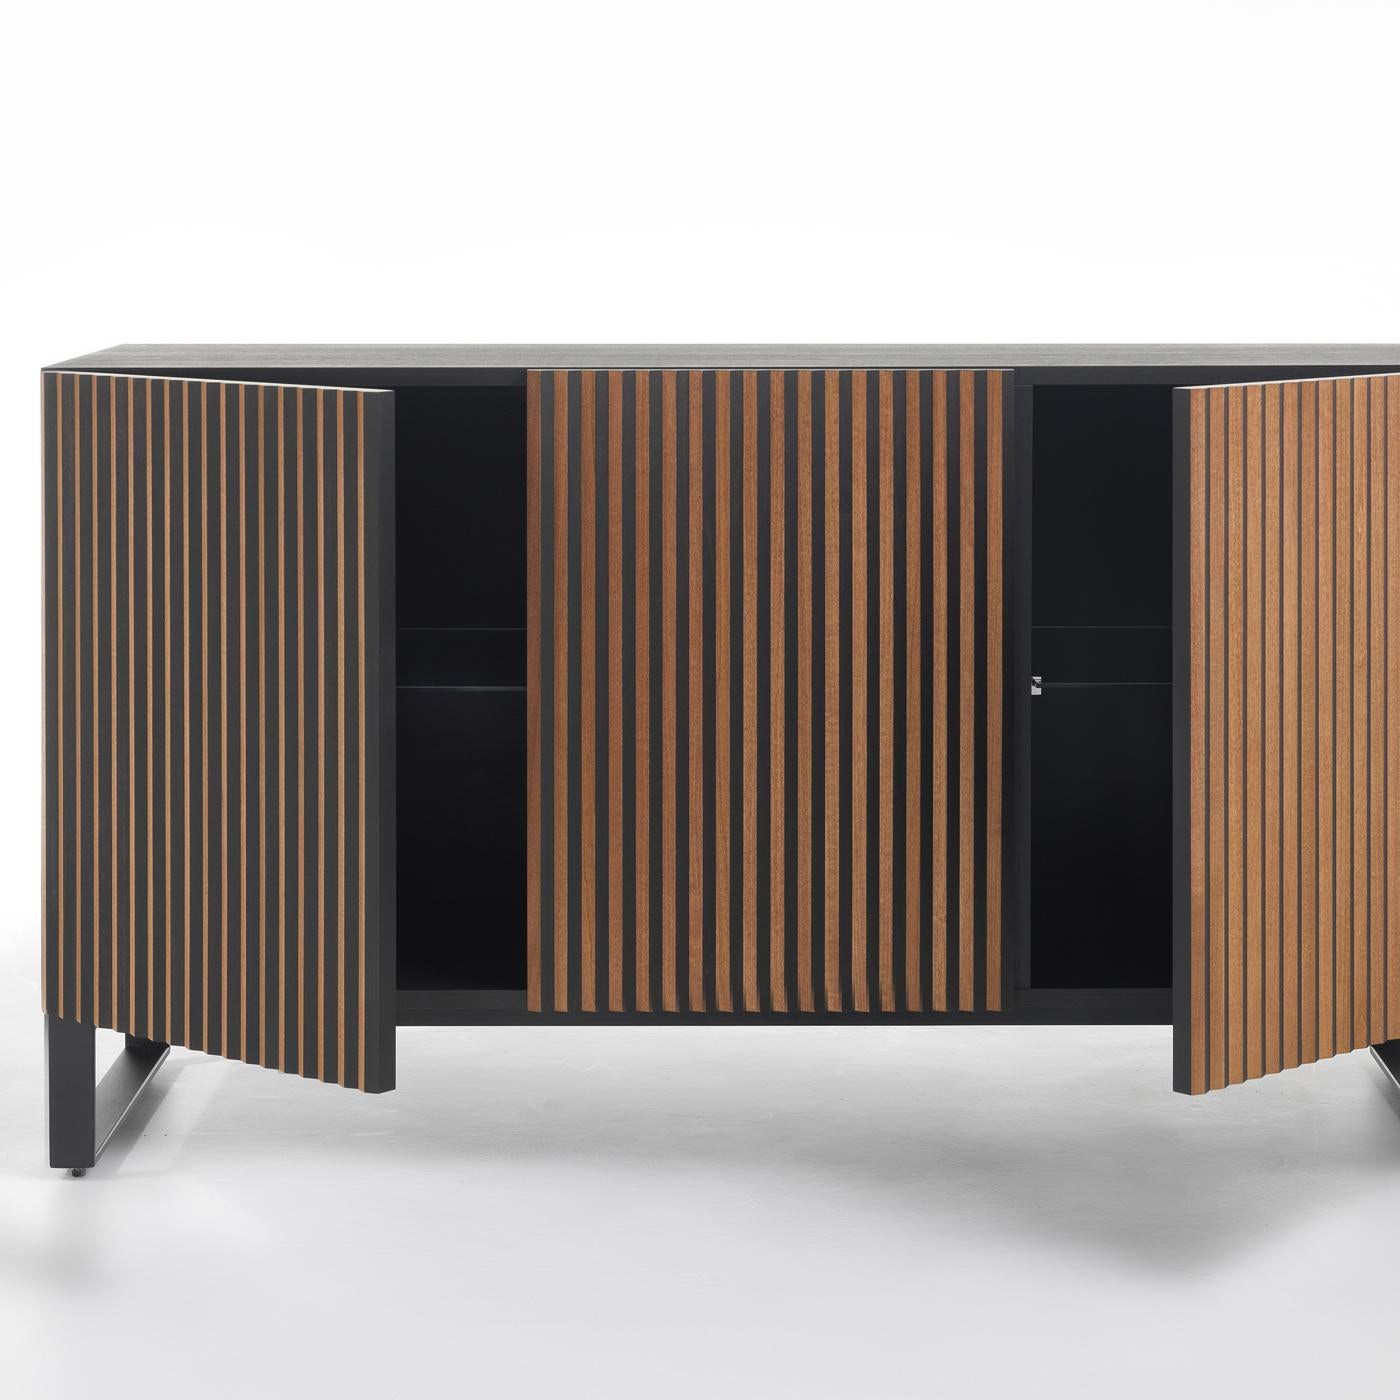 This two-door sideboard by StH is an exquisite, modern objet d'art, boasting captivating visual contrasts. It is crafted of mocha-finished beechwood and features two black ABS feet (2 cm high).? Boasting unique optical effects, the front panels are